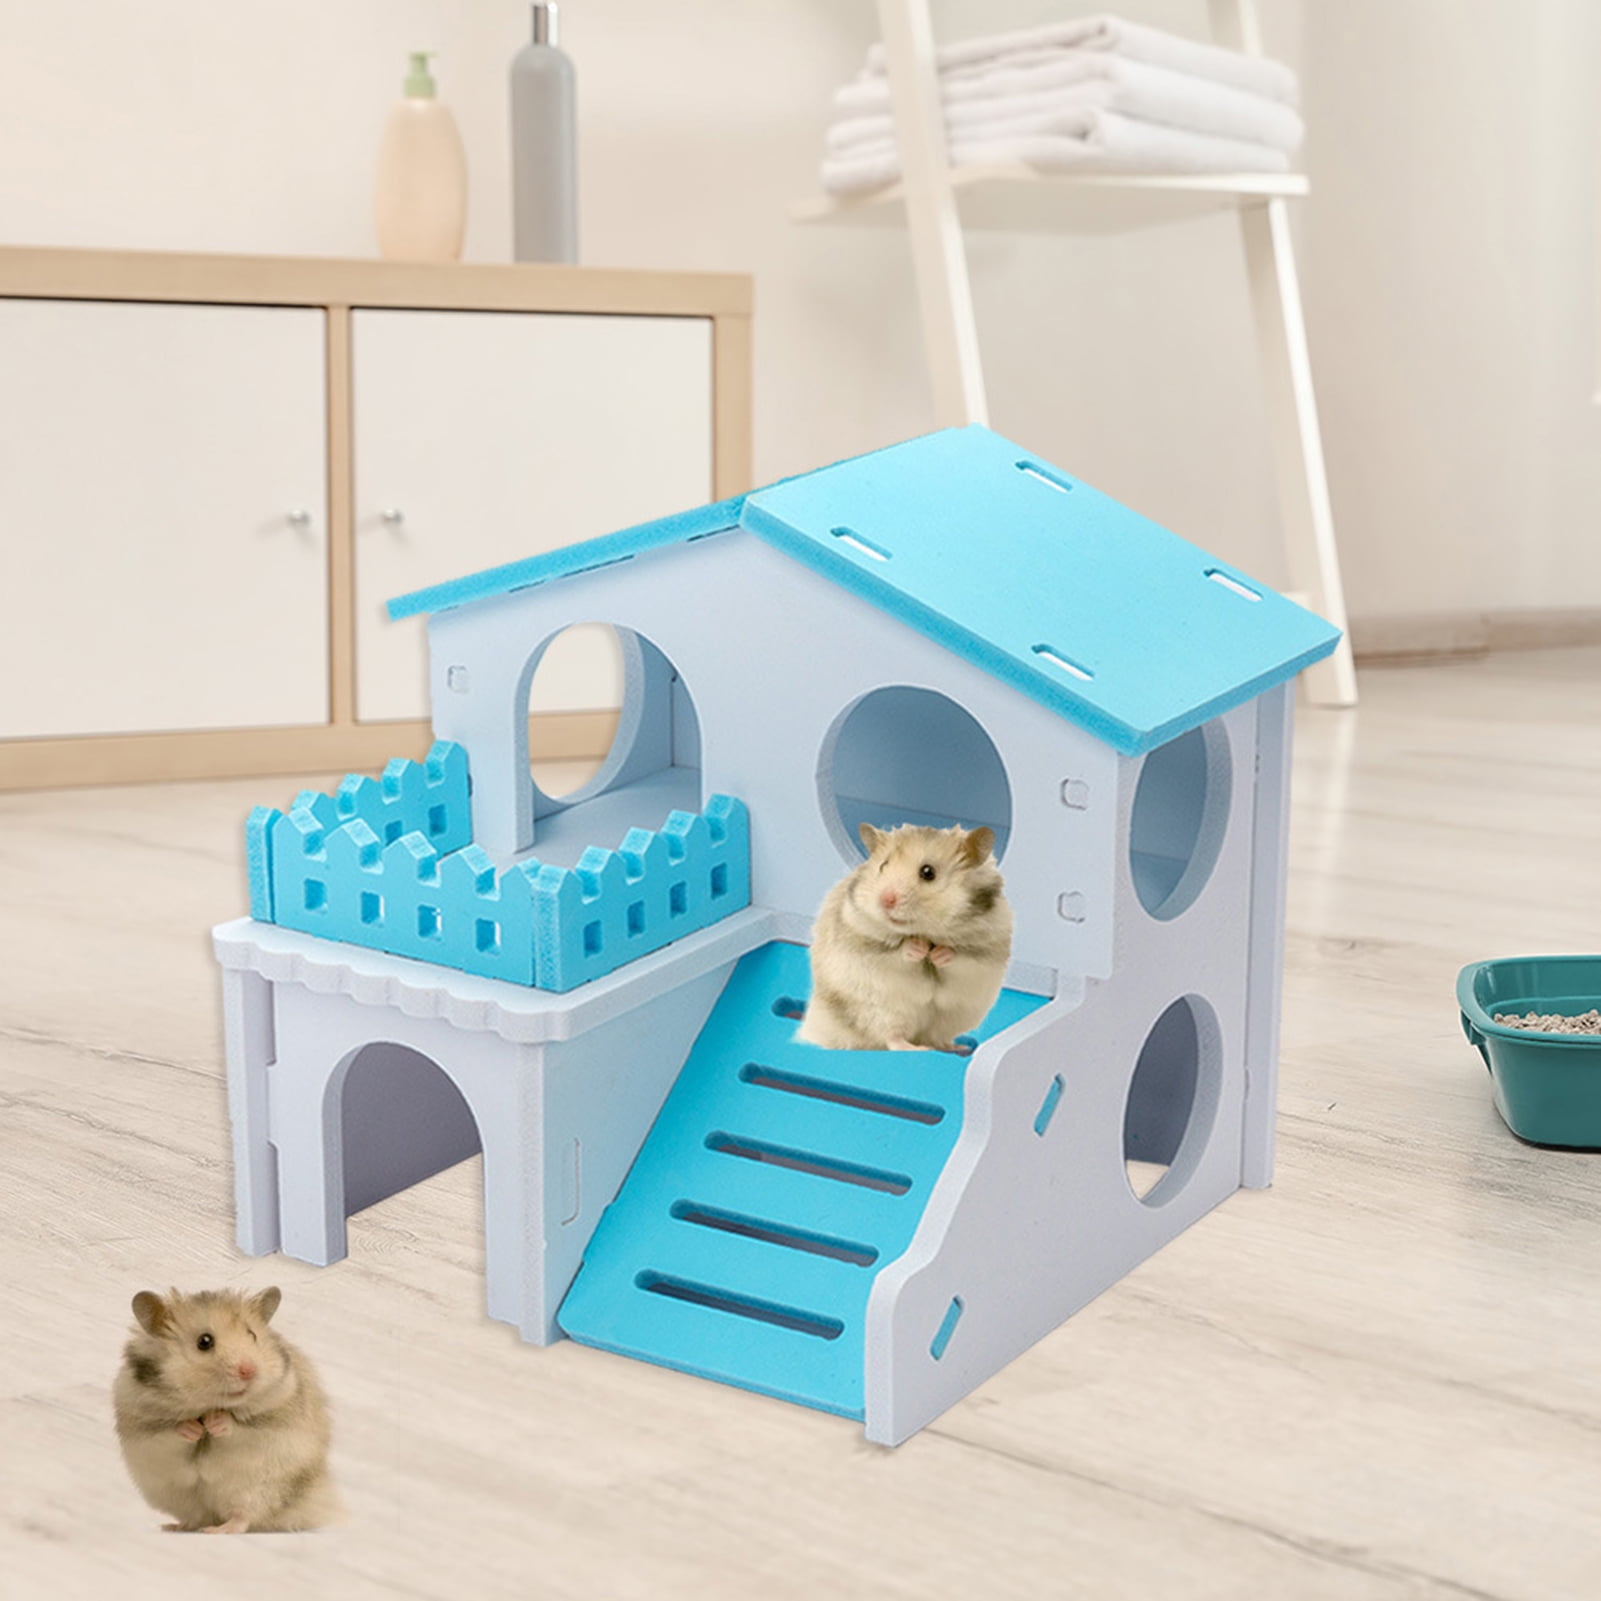 IVYRISE Small Animal Pets Playground Natural Wooden Seesaw Play Cube Tunnel Cage Home Hide Balance Toy for Small Hamster Mice Gerbil Guinea Pig 